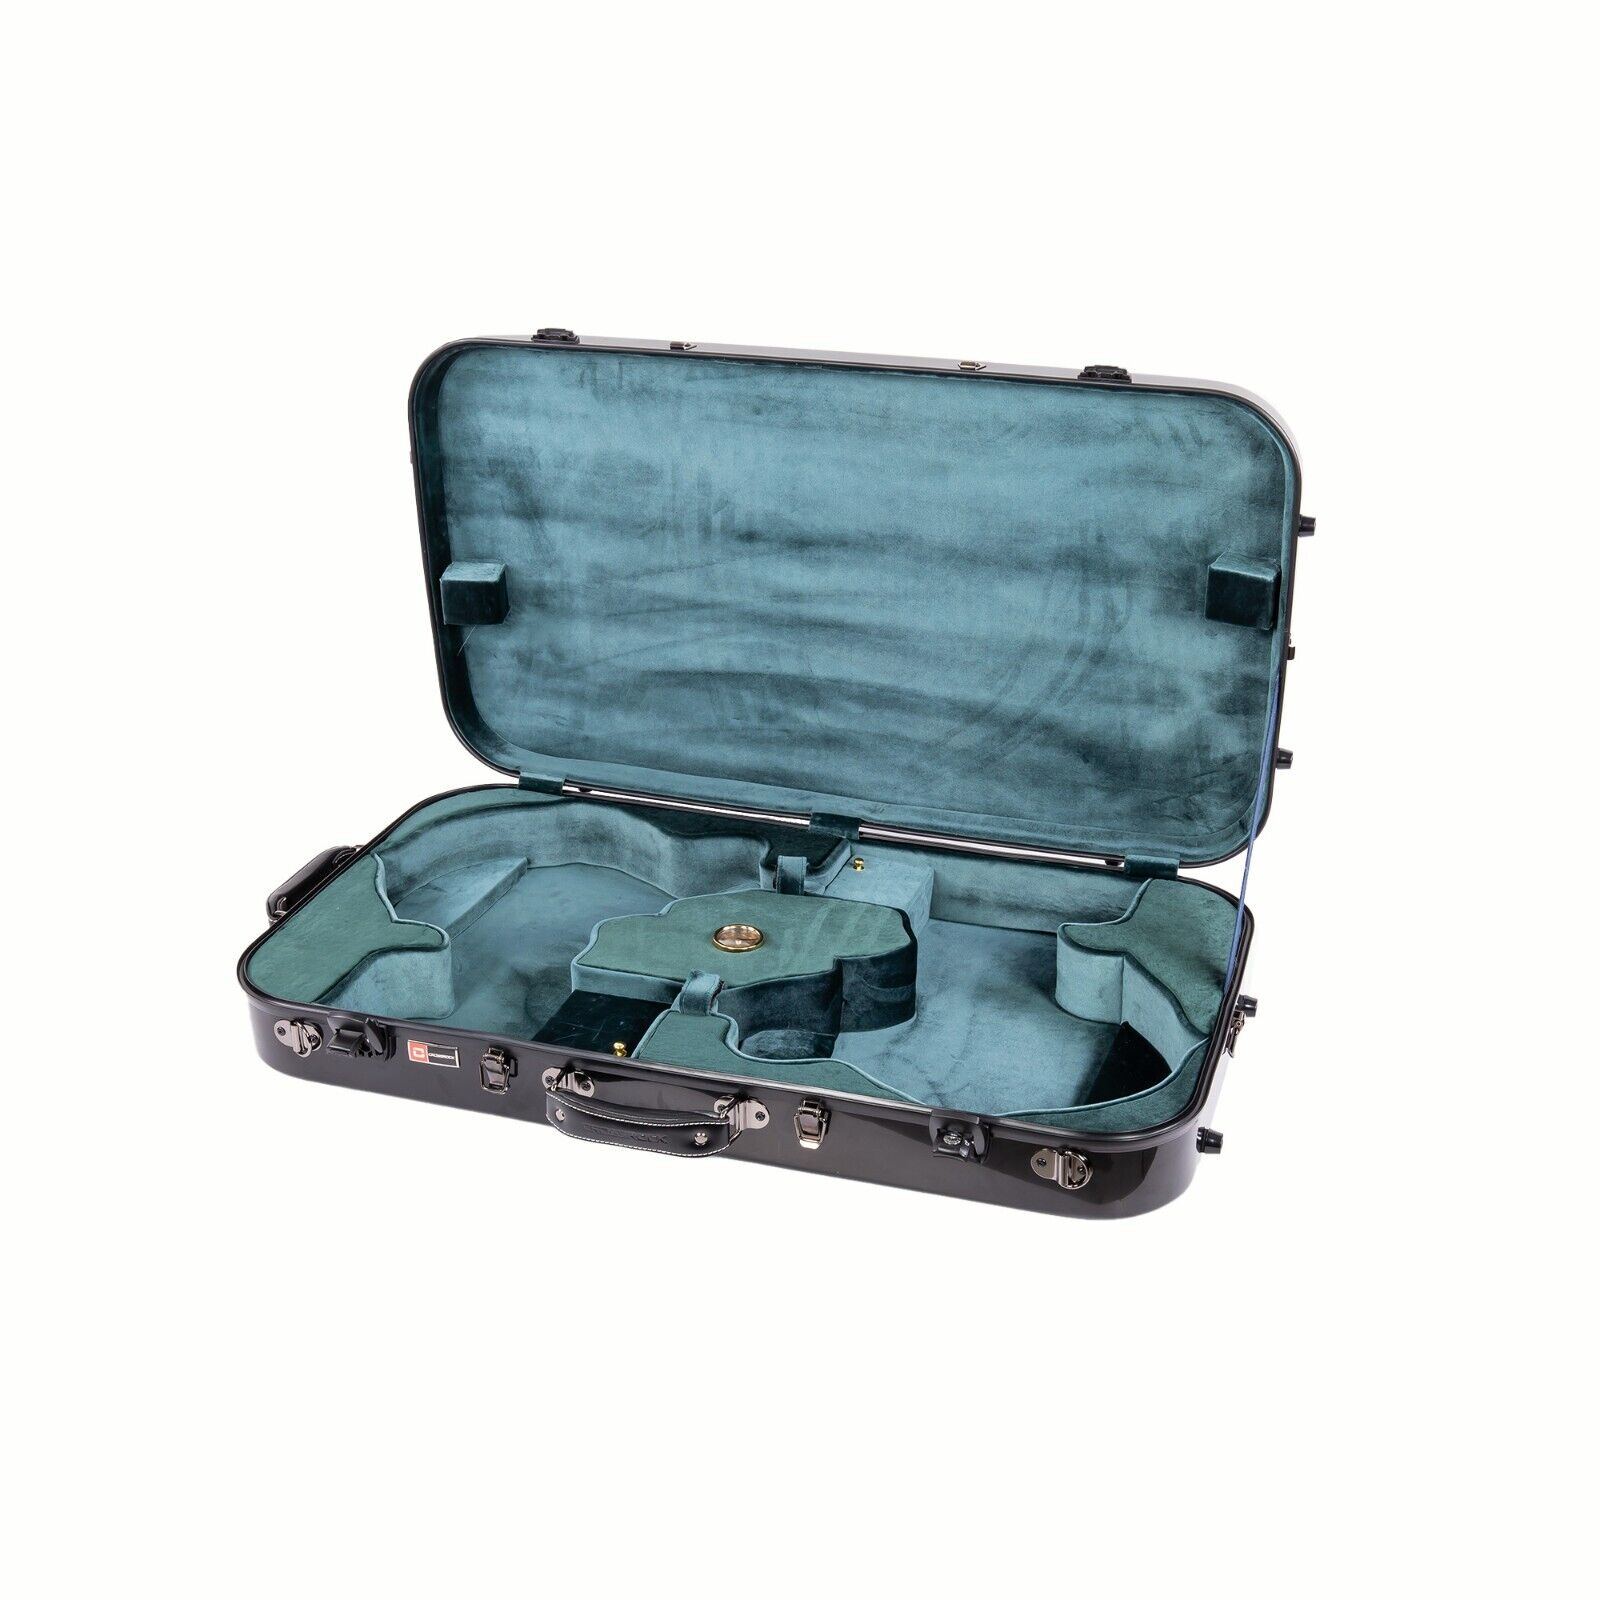 Crossrock Double Mandolins Hard Case fits Two A-A,F-F, A-F style Mandolins